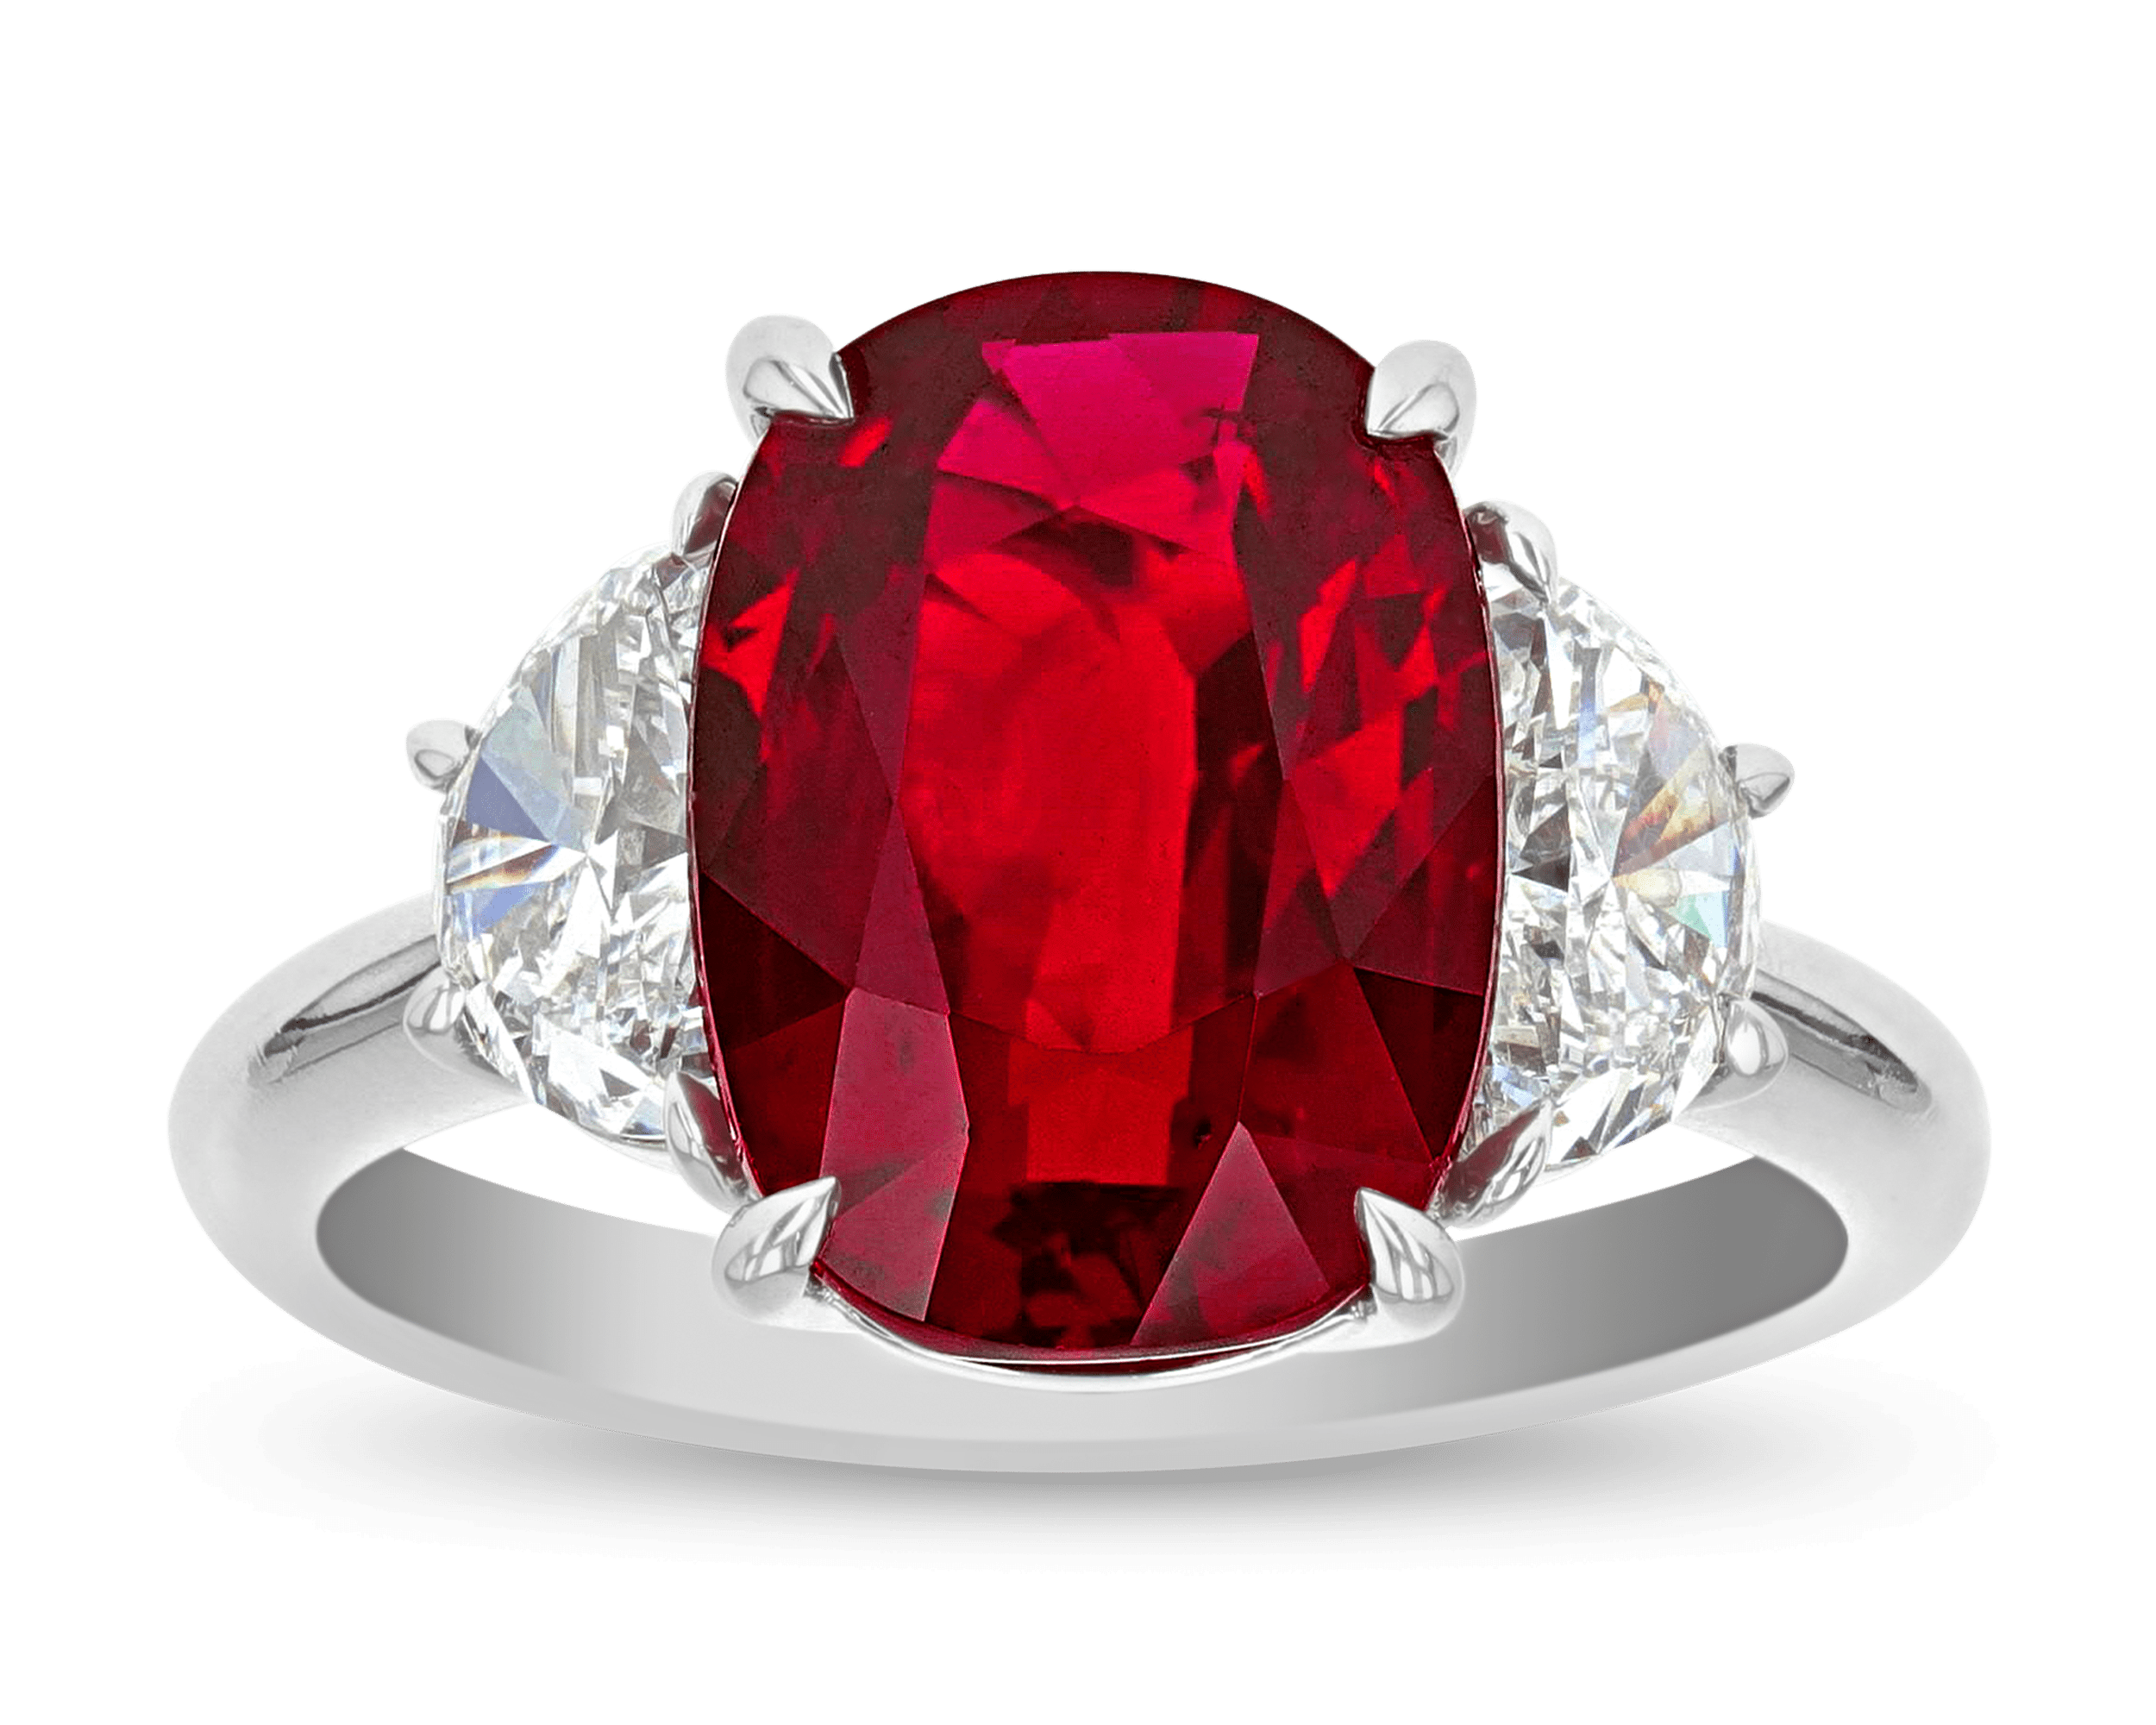 Mozambique Ruby Ring, 5.29 Carats